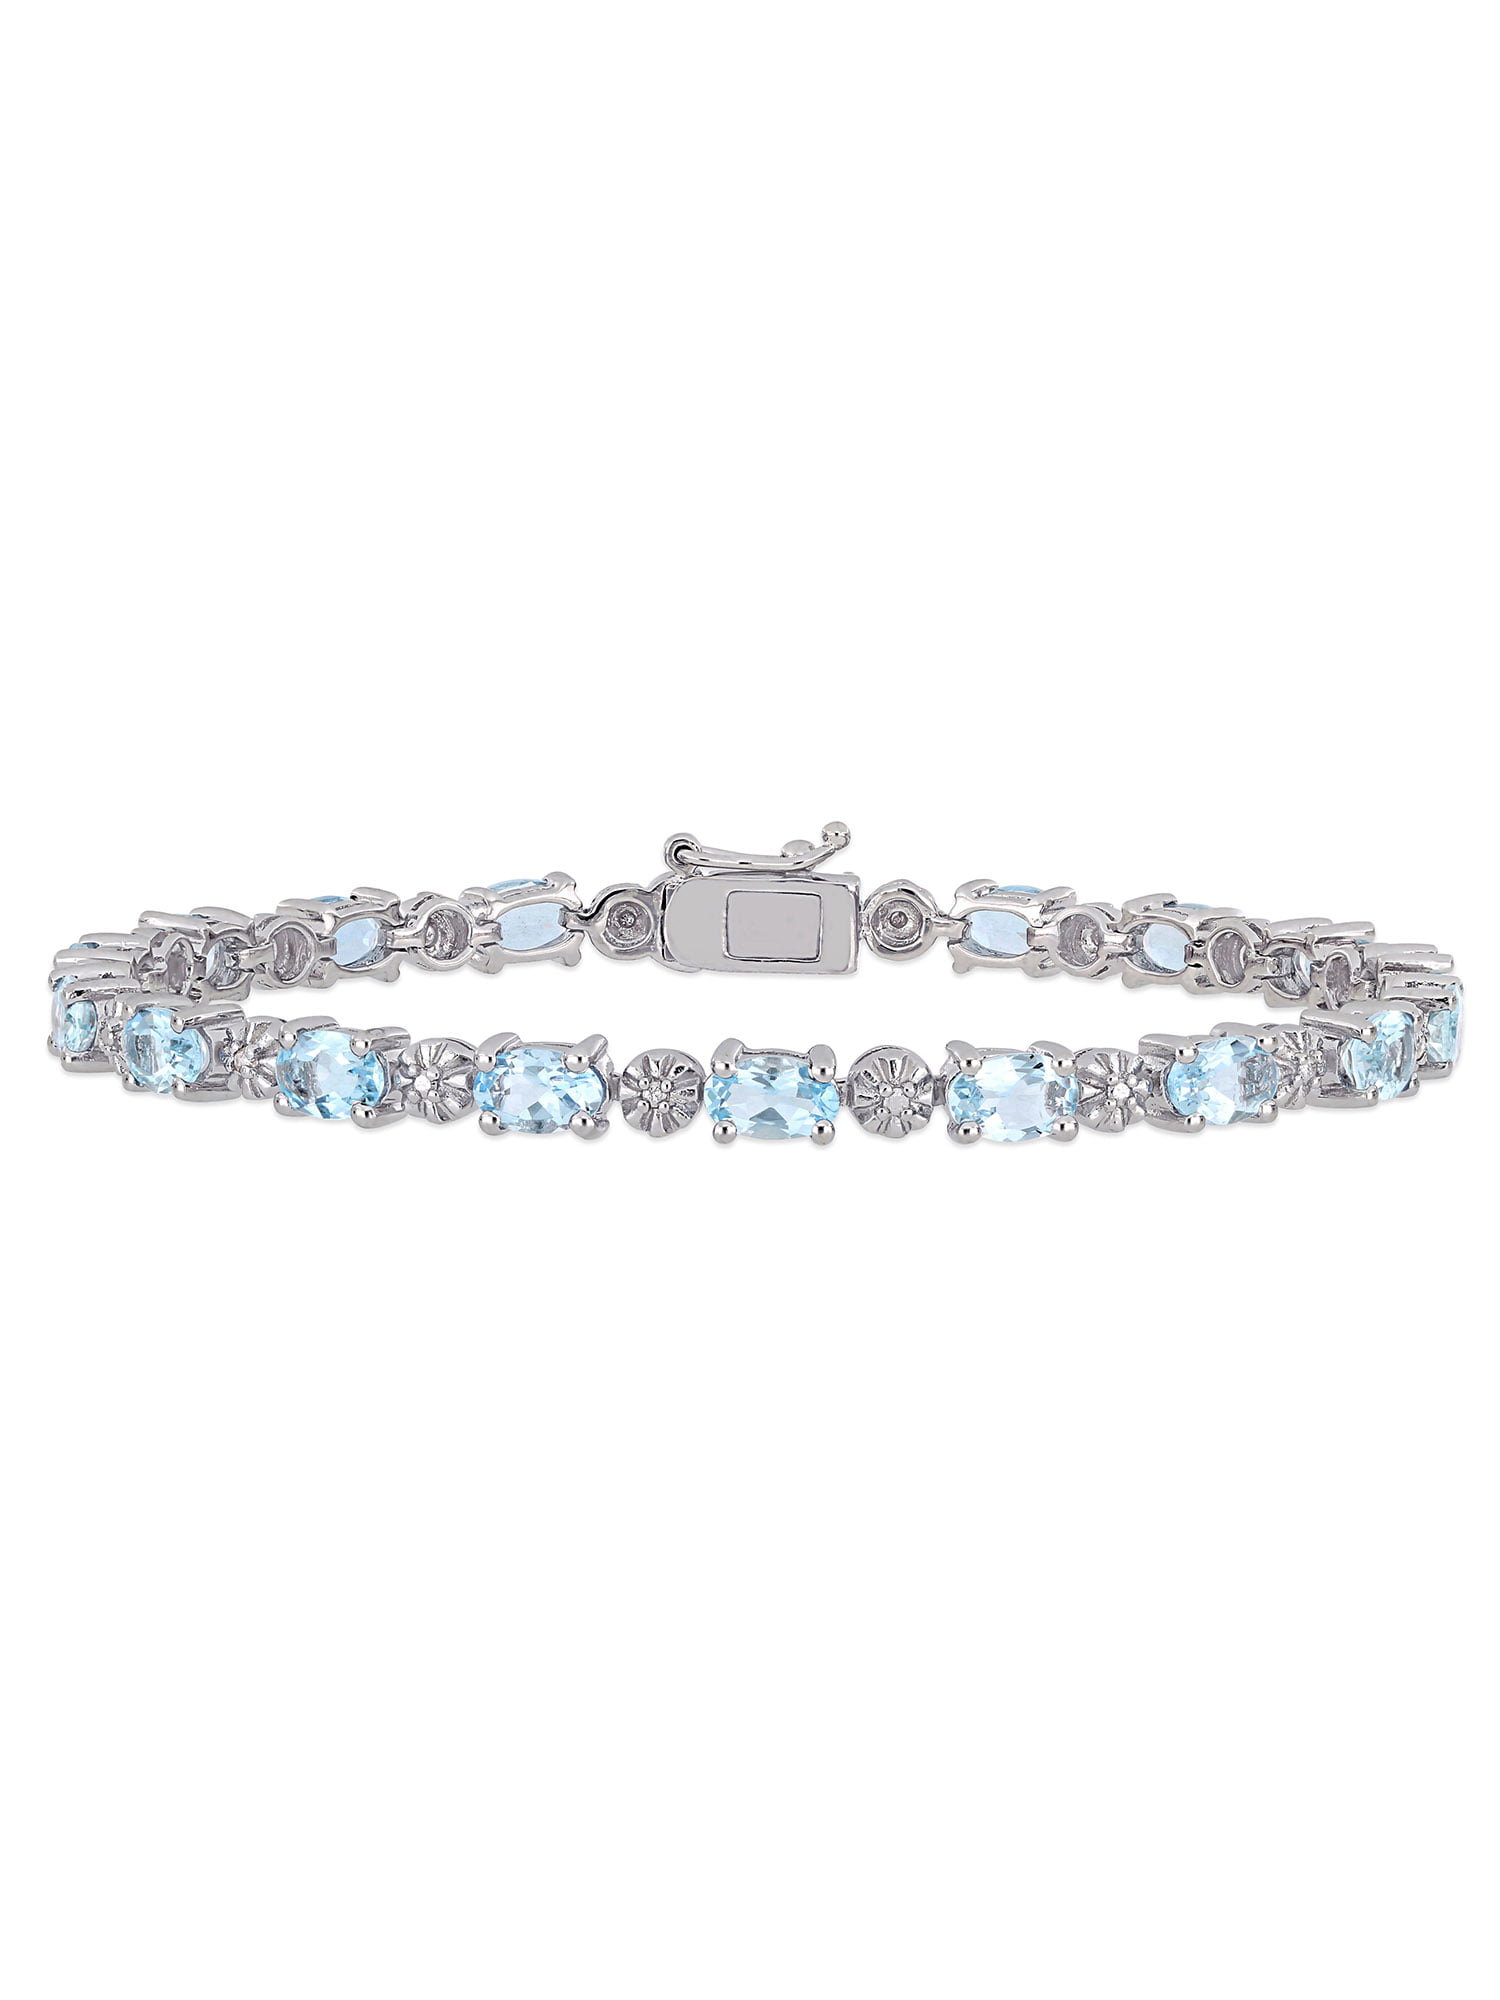 Tangelo 7-1/5 Carat T.G.W. Aquamarine and Diamond-Accent Sterling ...